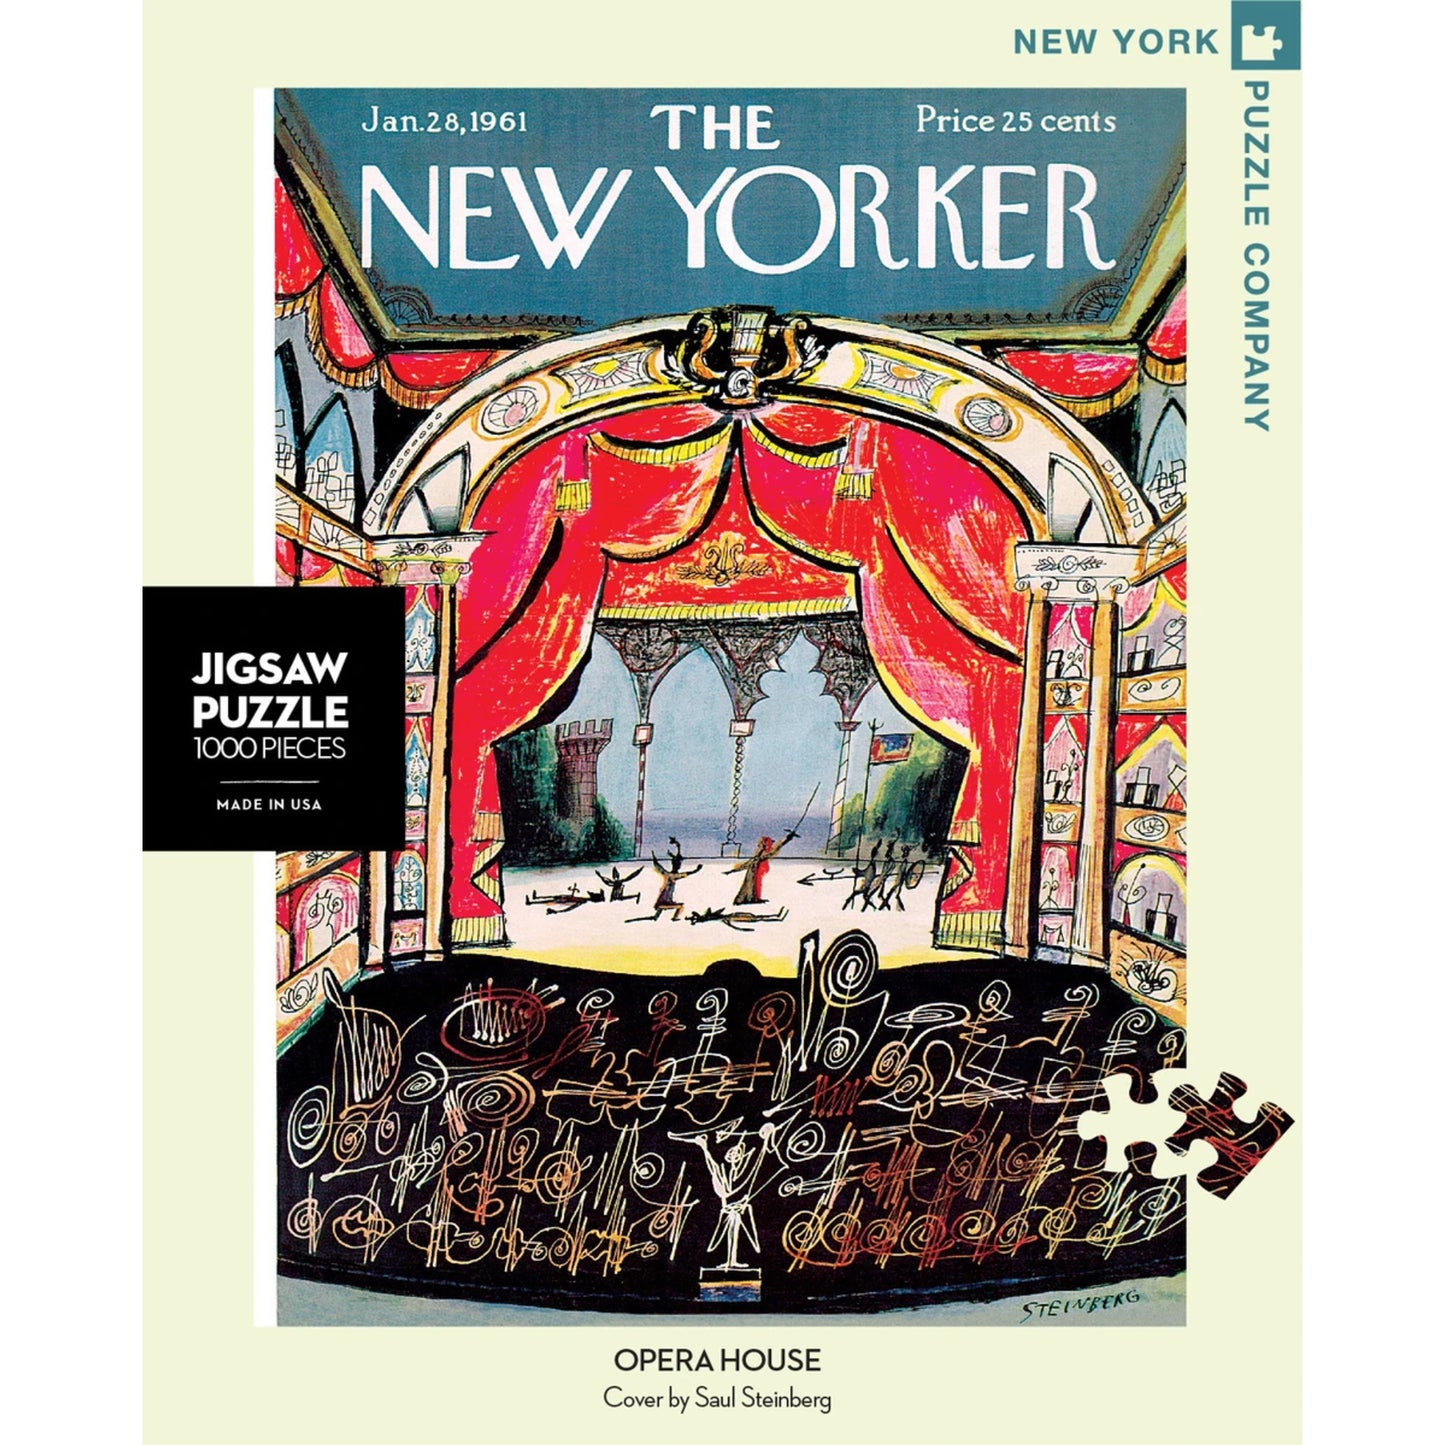 The New Yorker, Opera House Puzzle